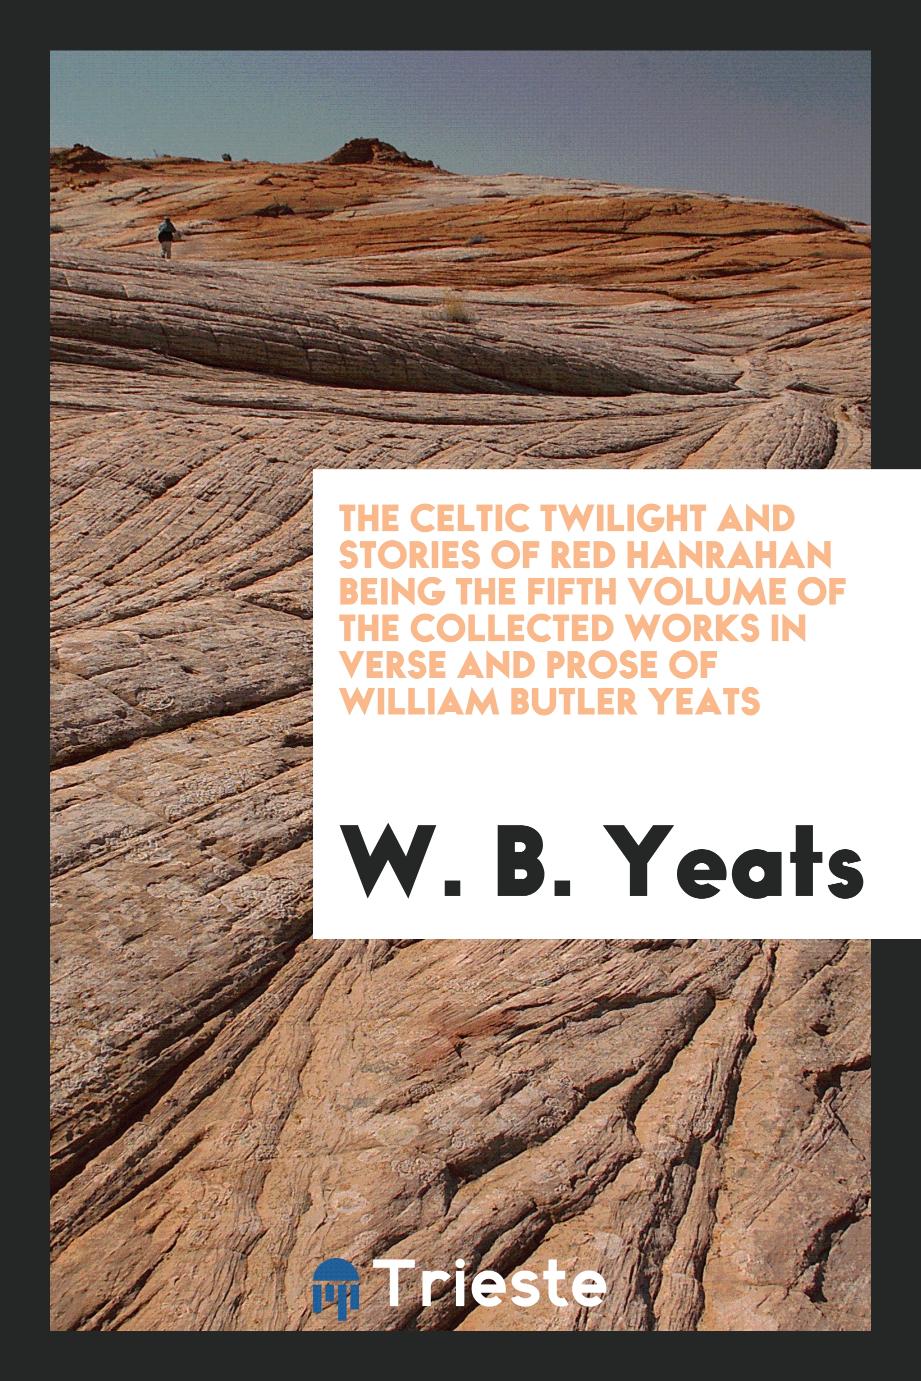 The Celtic twilight and stories of red Hanrahan being the fifth volume of The collected works in verse and prose of William Butler Yeats